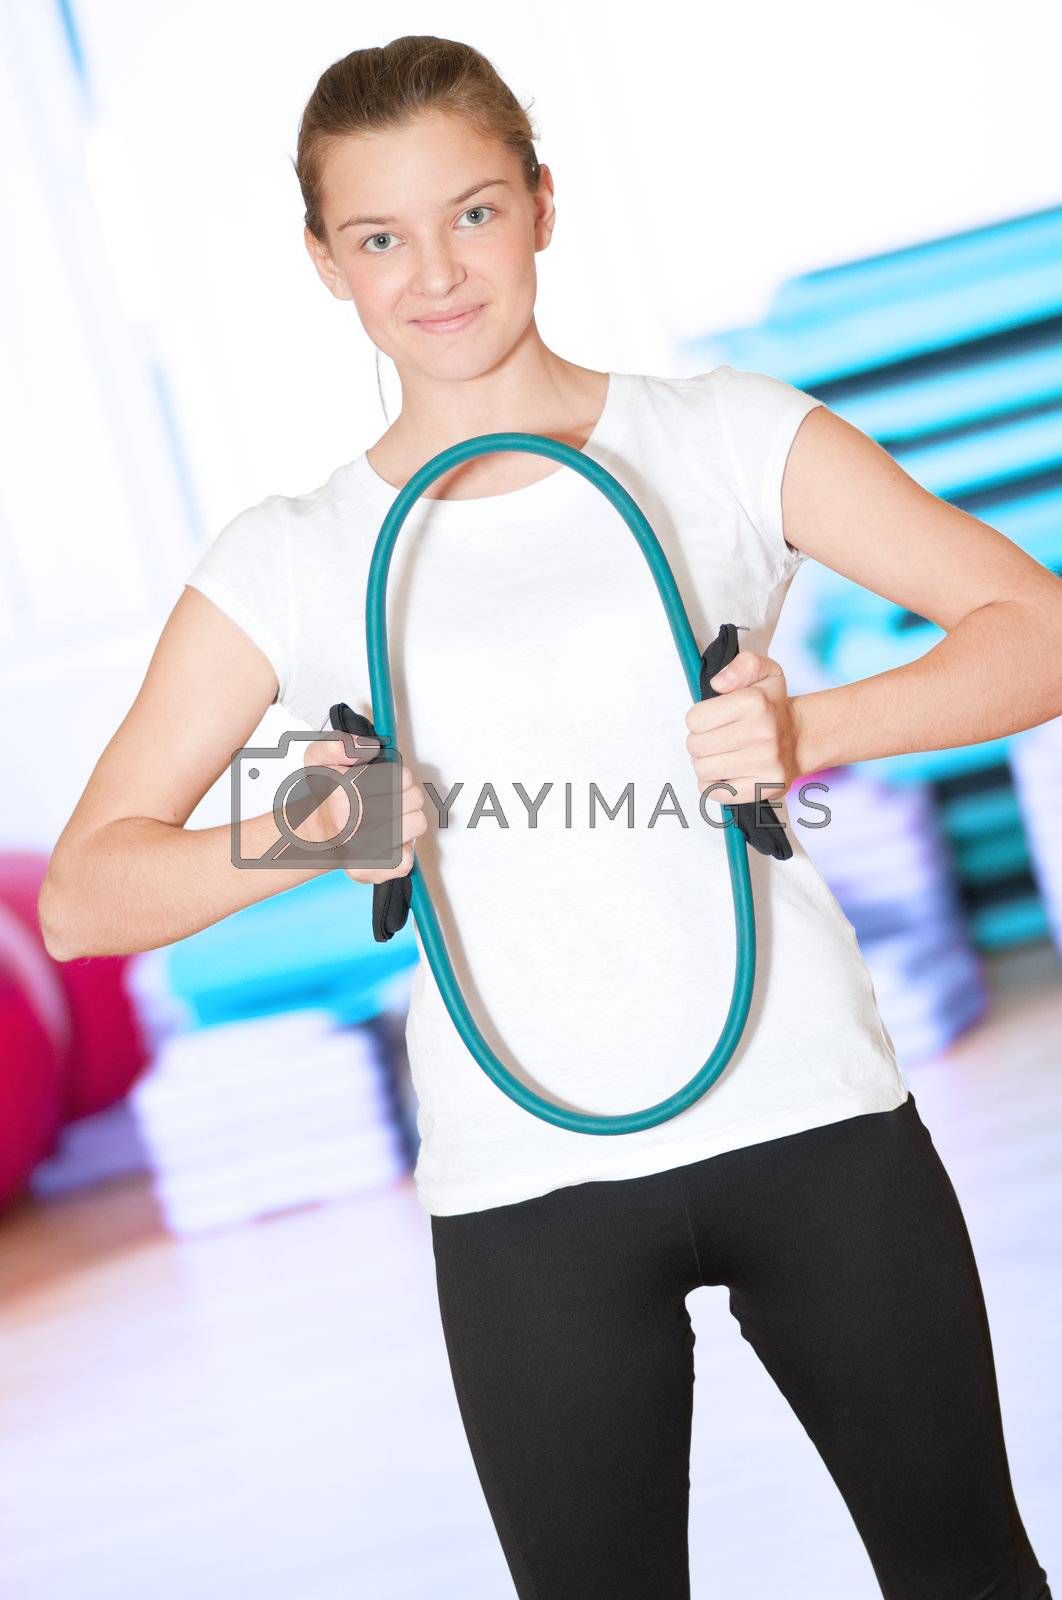 Royalty free image of Woman doing fitness exercise at sport gym by markin